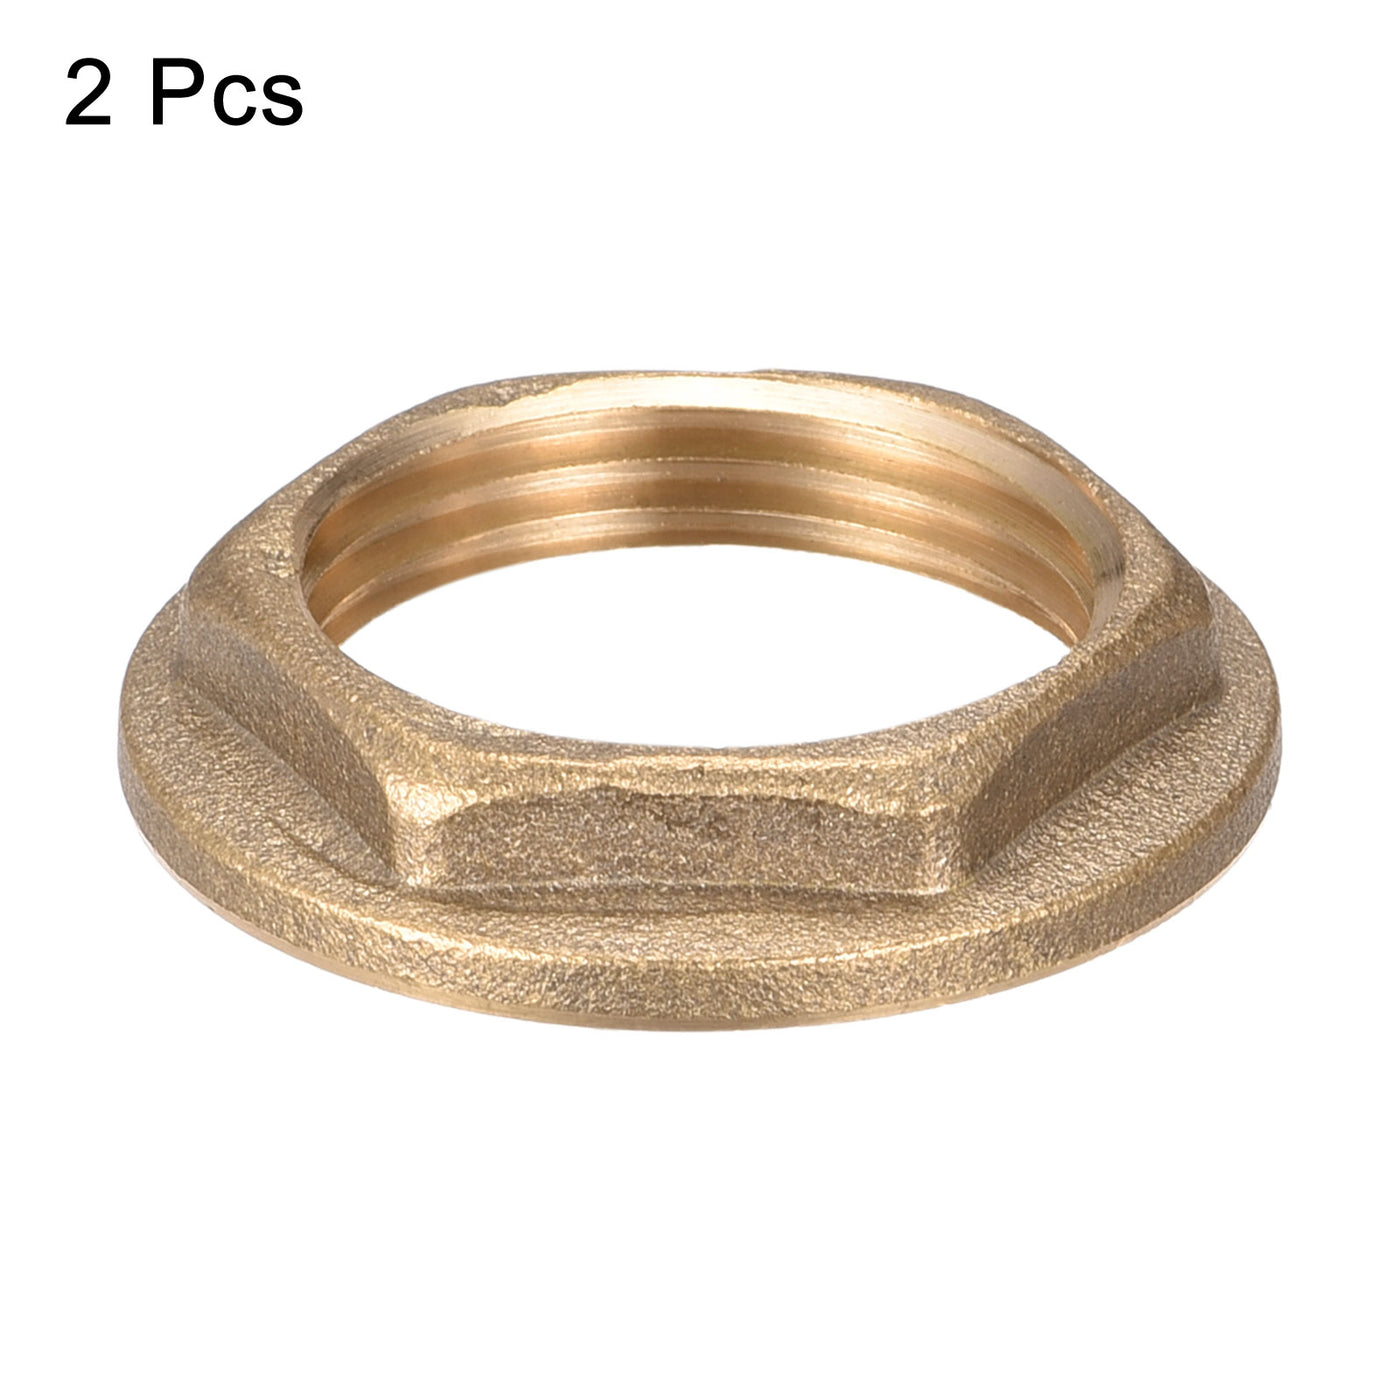 uxcell Uxcell Lock Nut with Flange, Hex Brass Female Locknut for Plumbing